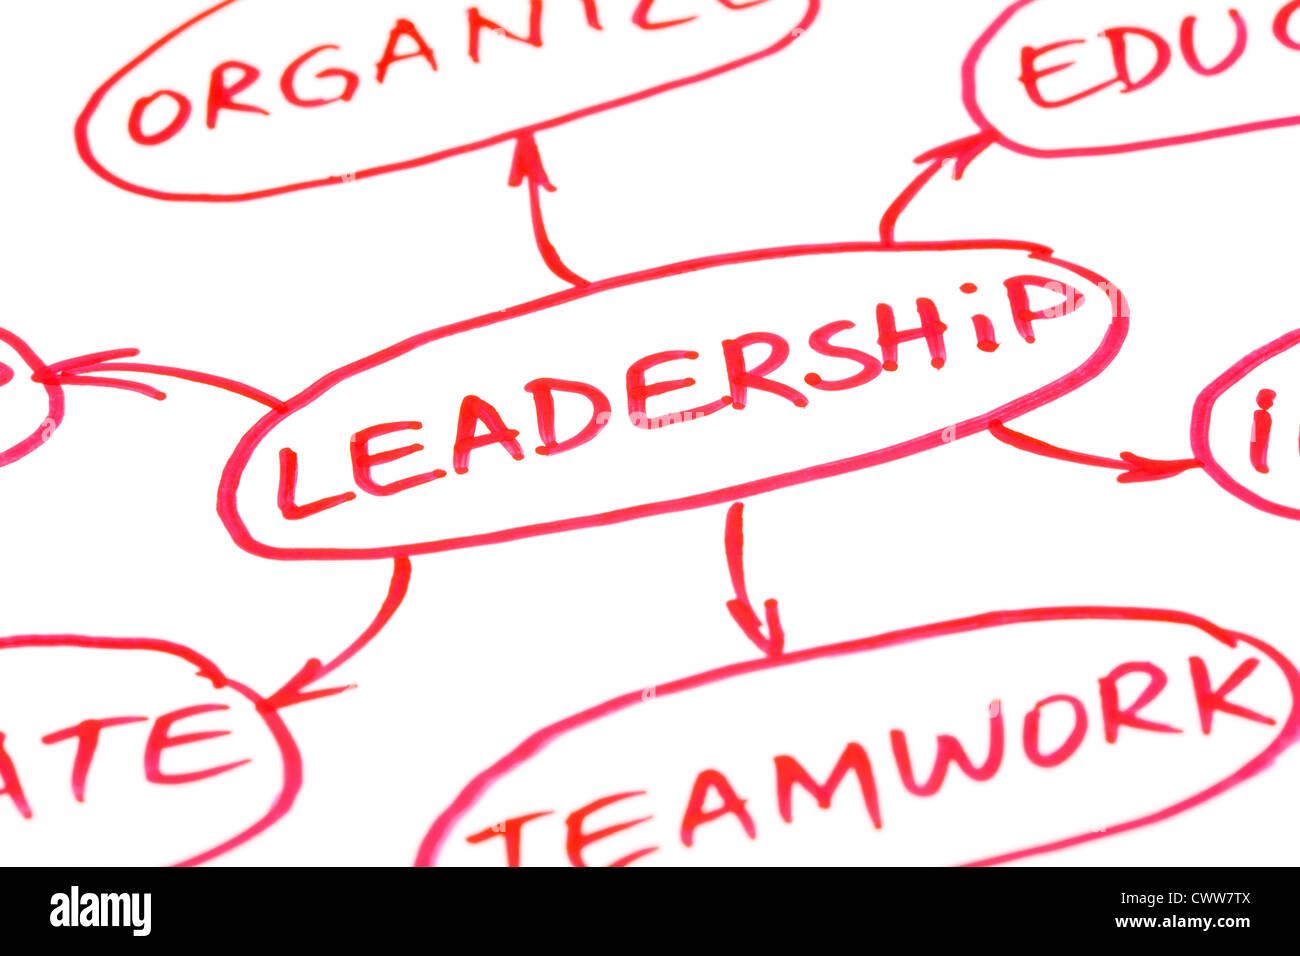 Leadership flow chart written with red pen on paper Stock Photo